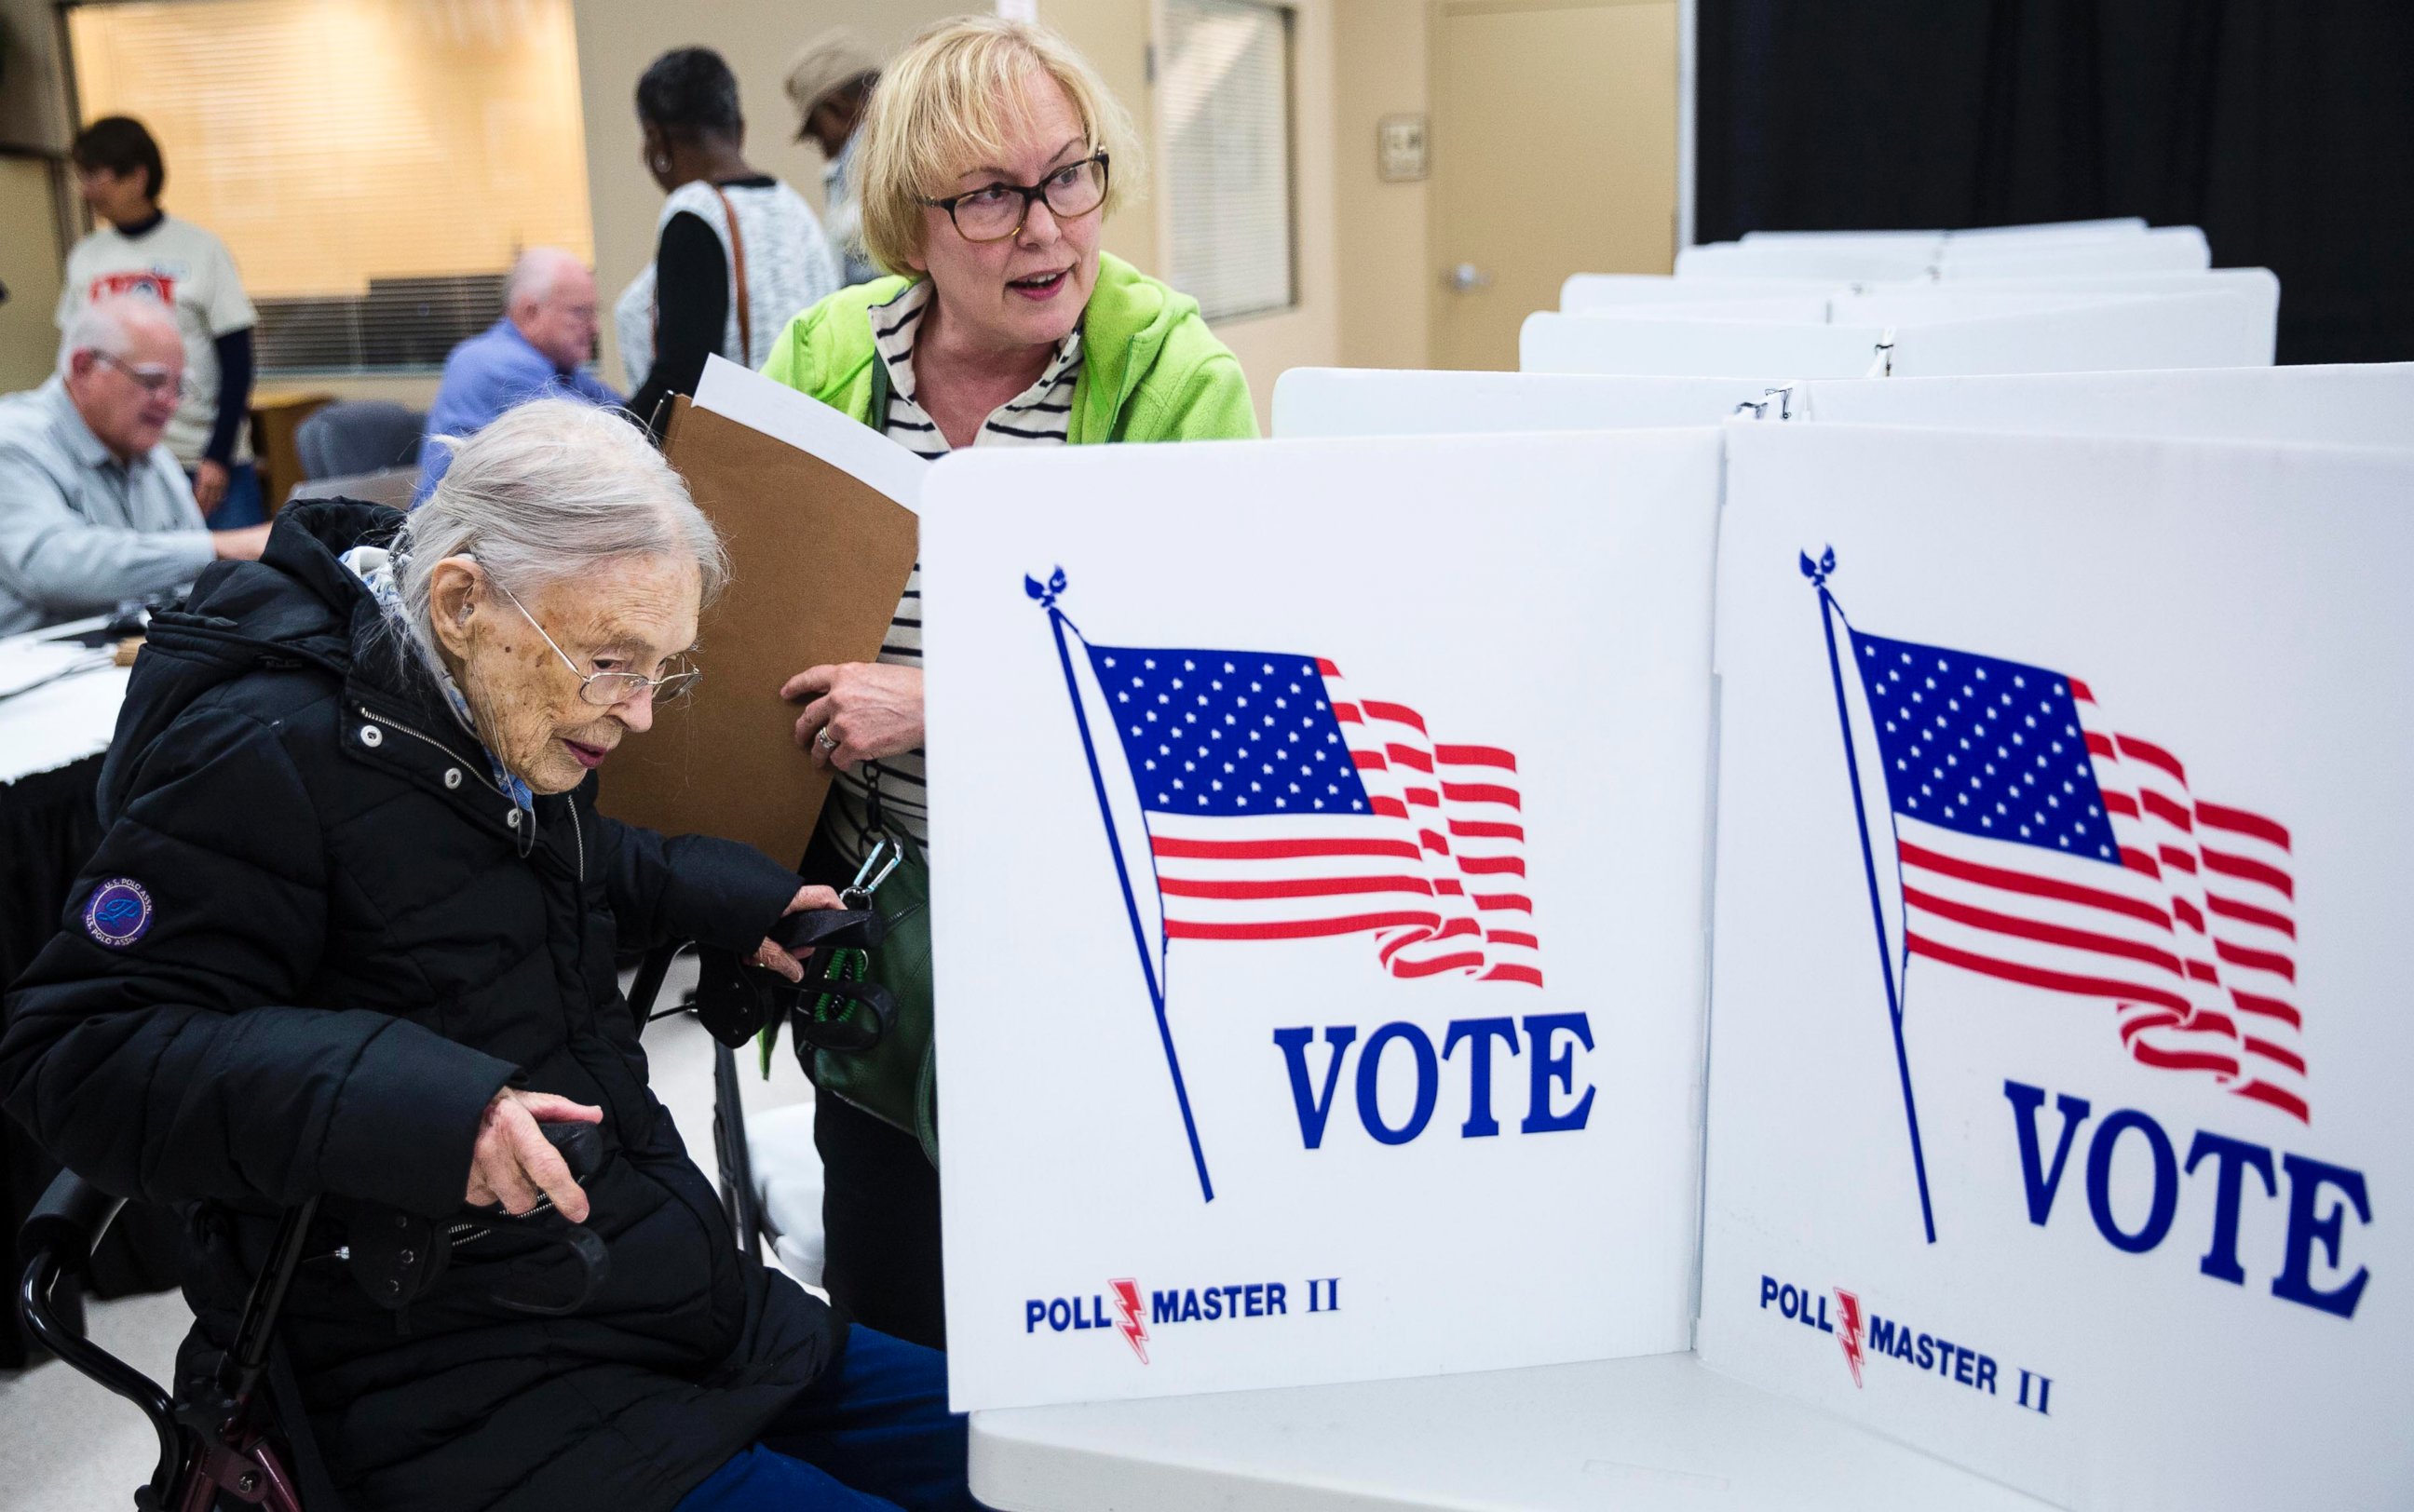 PHOTO: Rosemary Milburn, right, helps her mother Garvin Colburn cast her ballot during early voting at the Hamilton County Election Commission on Amnicola Highway, Oct. 22, 2016, in Chattanooga, Tennessee. 